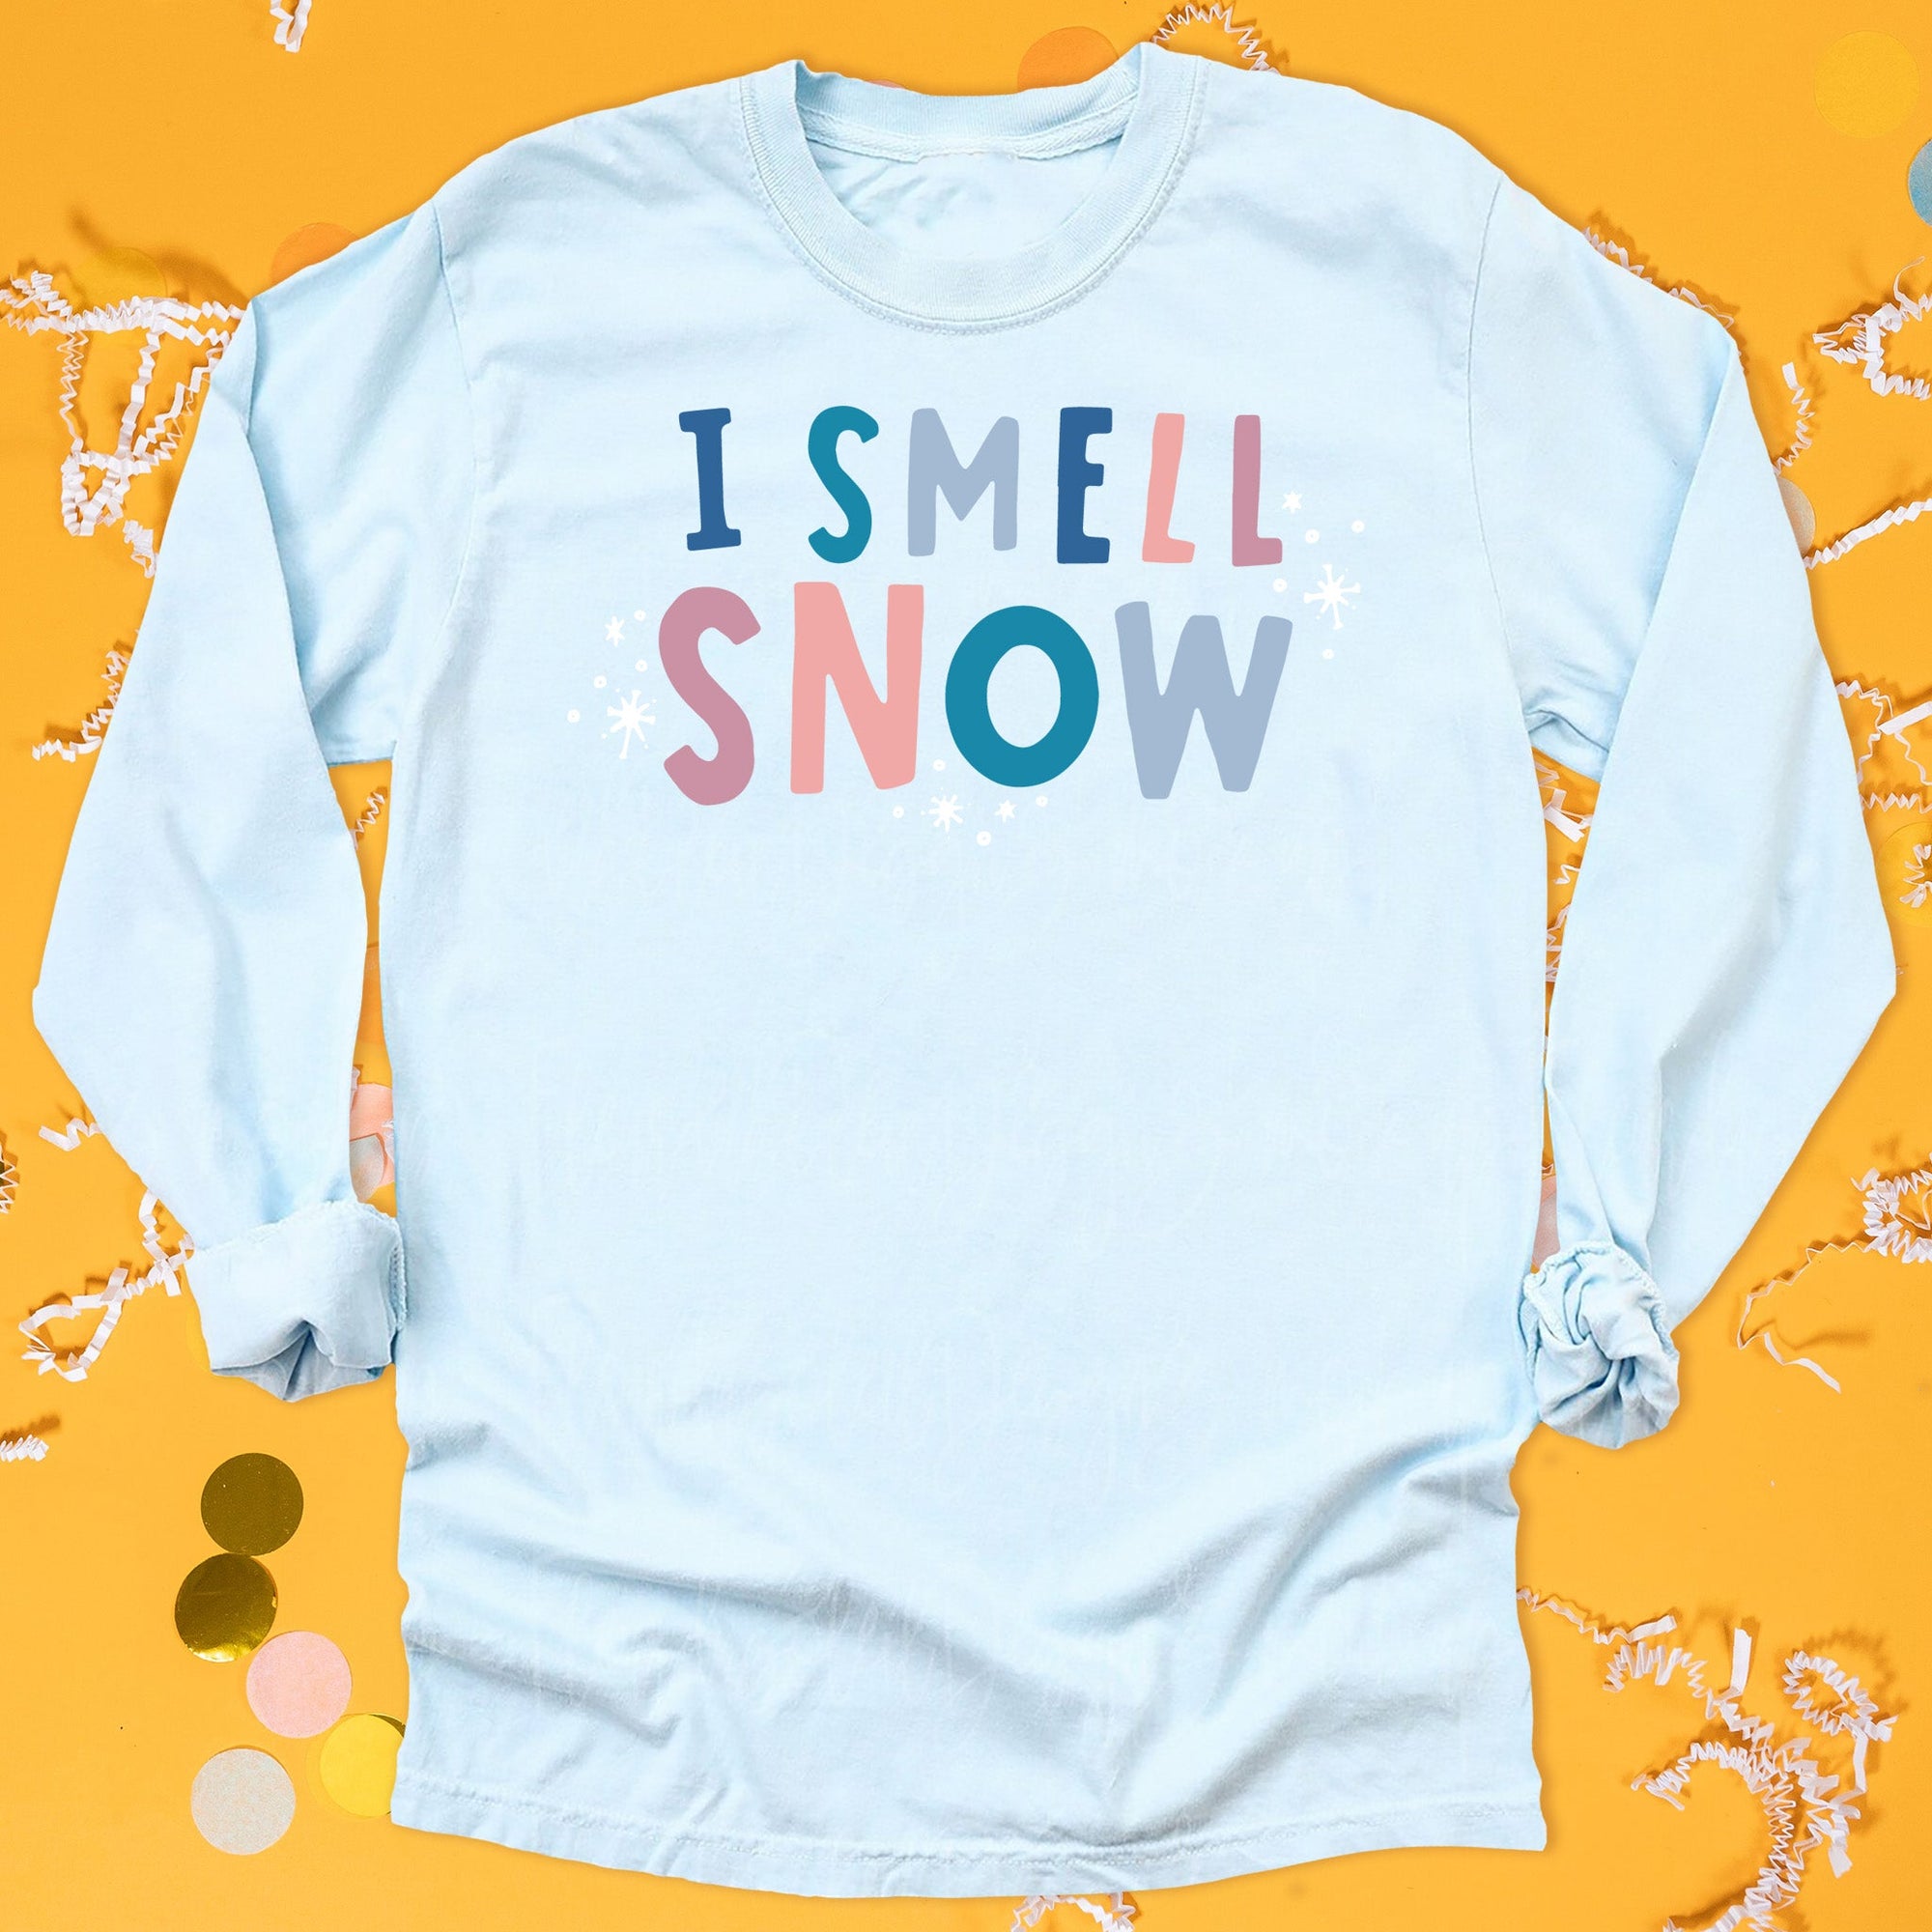 On a sunny mustard background sits a long sleeved tshirt with white crinkle and big, colorful confetti scattered around. This Gilmore Girls inspired tee is light blue with colorful lettering and snow scattered around them. It says "I SMELL SNOW" in all caps, handwritten block font. The colors are navy, teal, grey, coral, and rose.